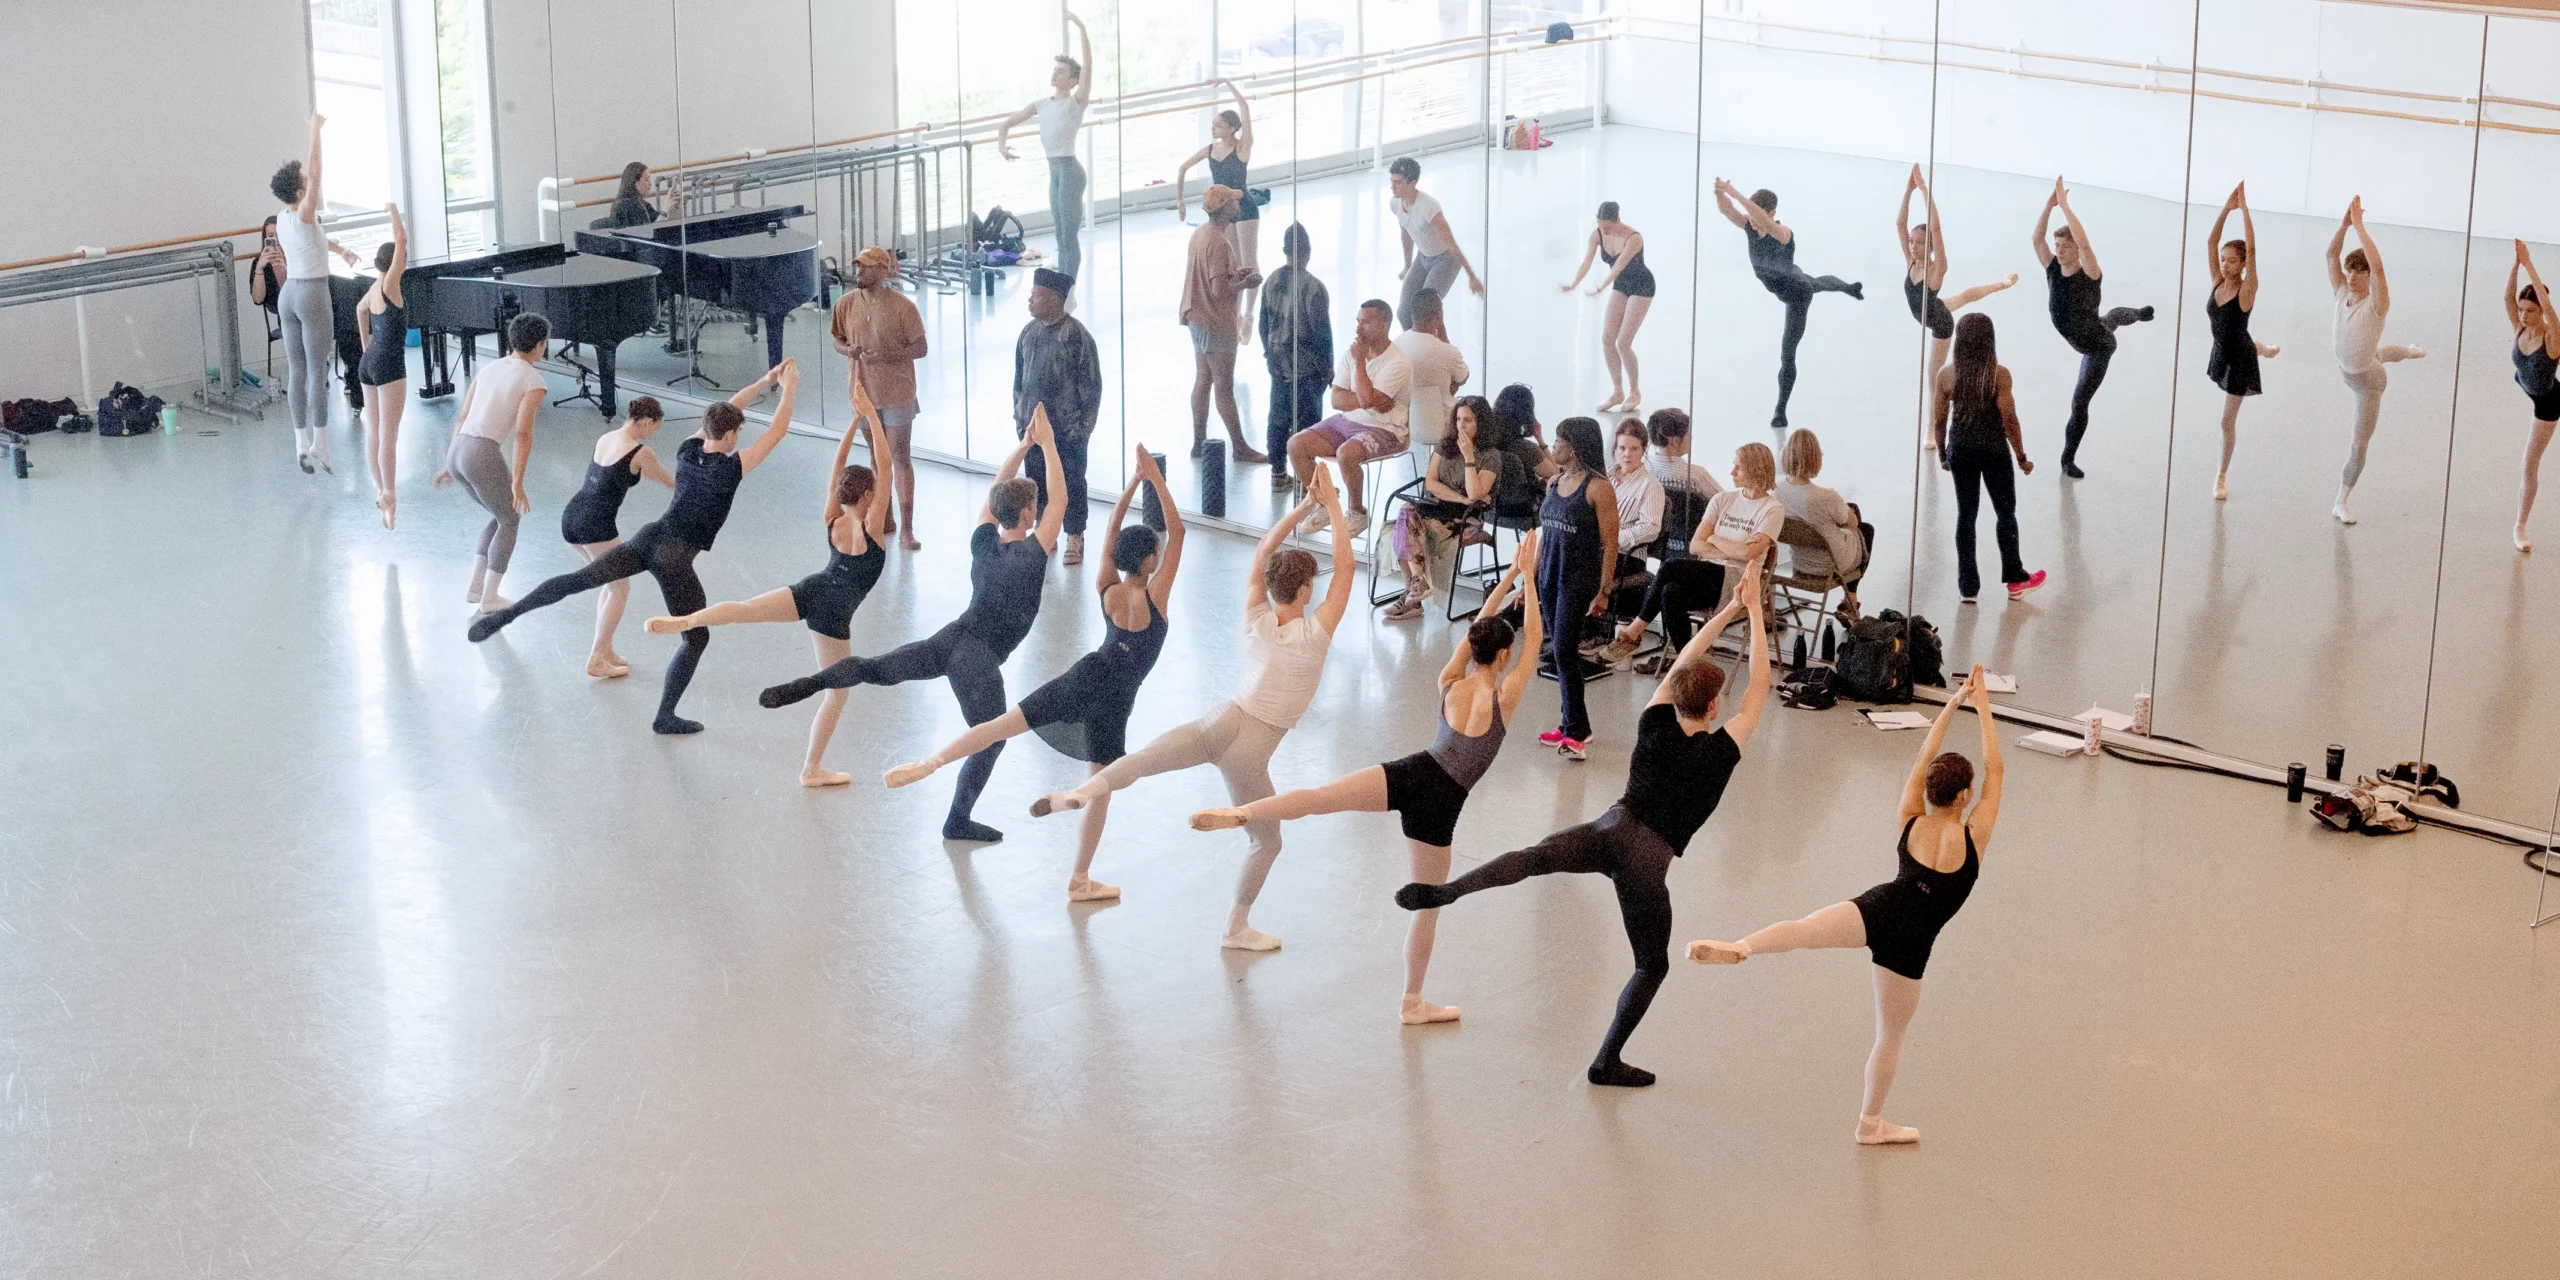 Twelve young male and female dancers are shown photographed from above and from a distance. They form a straight line at the front of the large dance studio, facing a wall of mirrors. The two dancers on the far stage left end of the line jump up, their legs in paralell and their arms at their sides, while the next two plié. The rest of the dancers pose in arabesque plié with their left leg up and their arms lifted above their heads, hands clasped. A team of adults face the dancers and watch them; some sit in chairs while the others stand. The female dancers wear leotards, short ballet skirts, pink tights and pointe shoes, while the male students wear t-shirts, black or gray tights and ballet slippers.